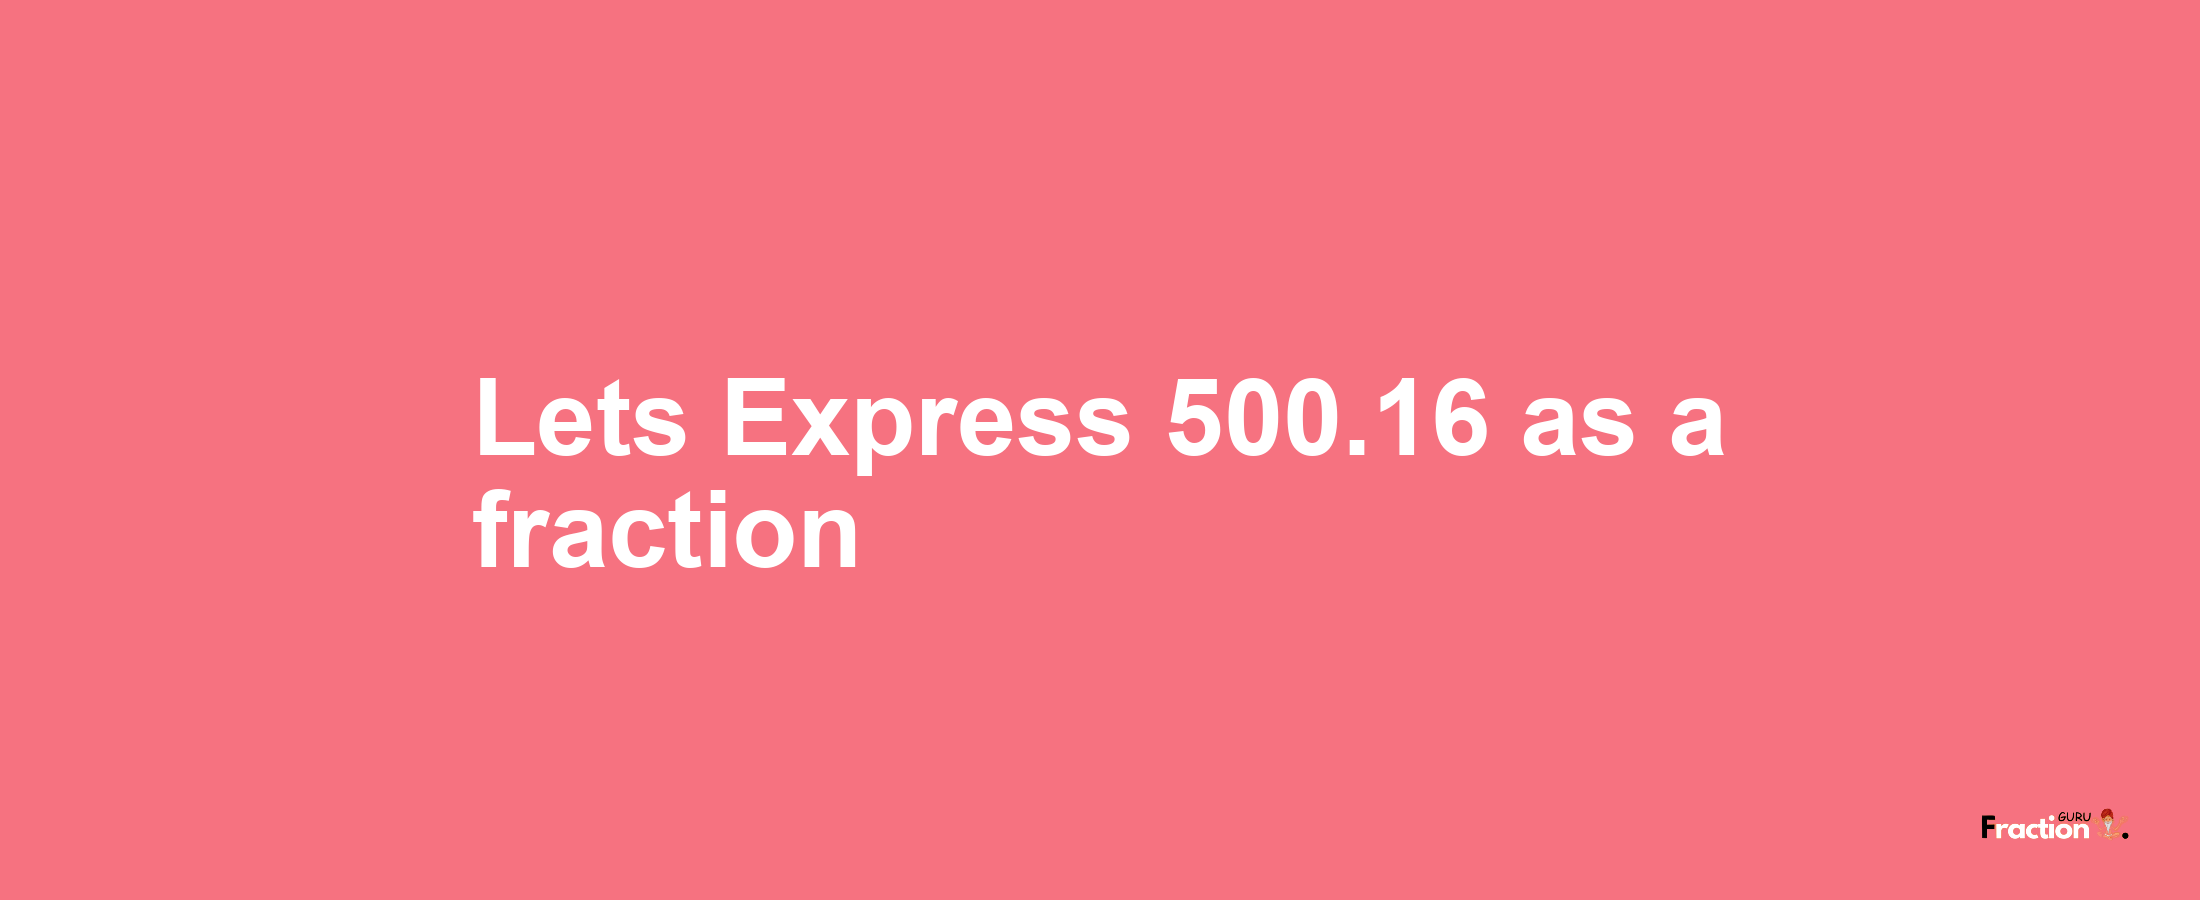 Lets Express 500.16 as afraction